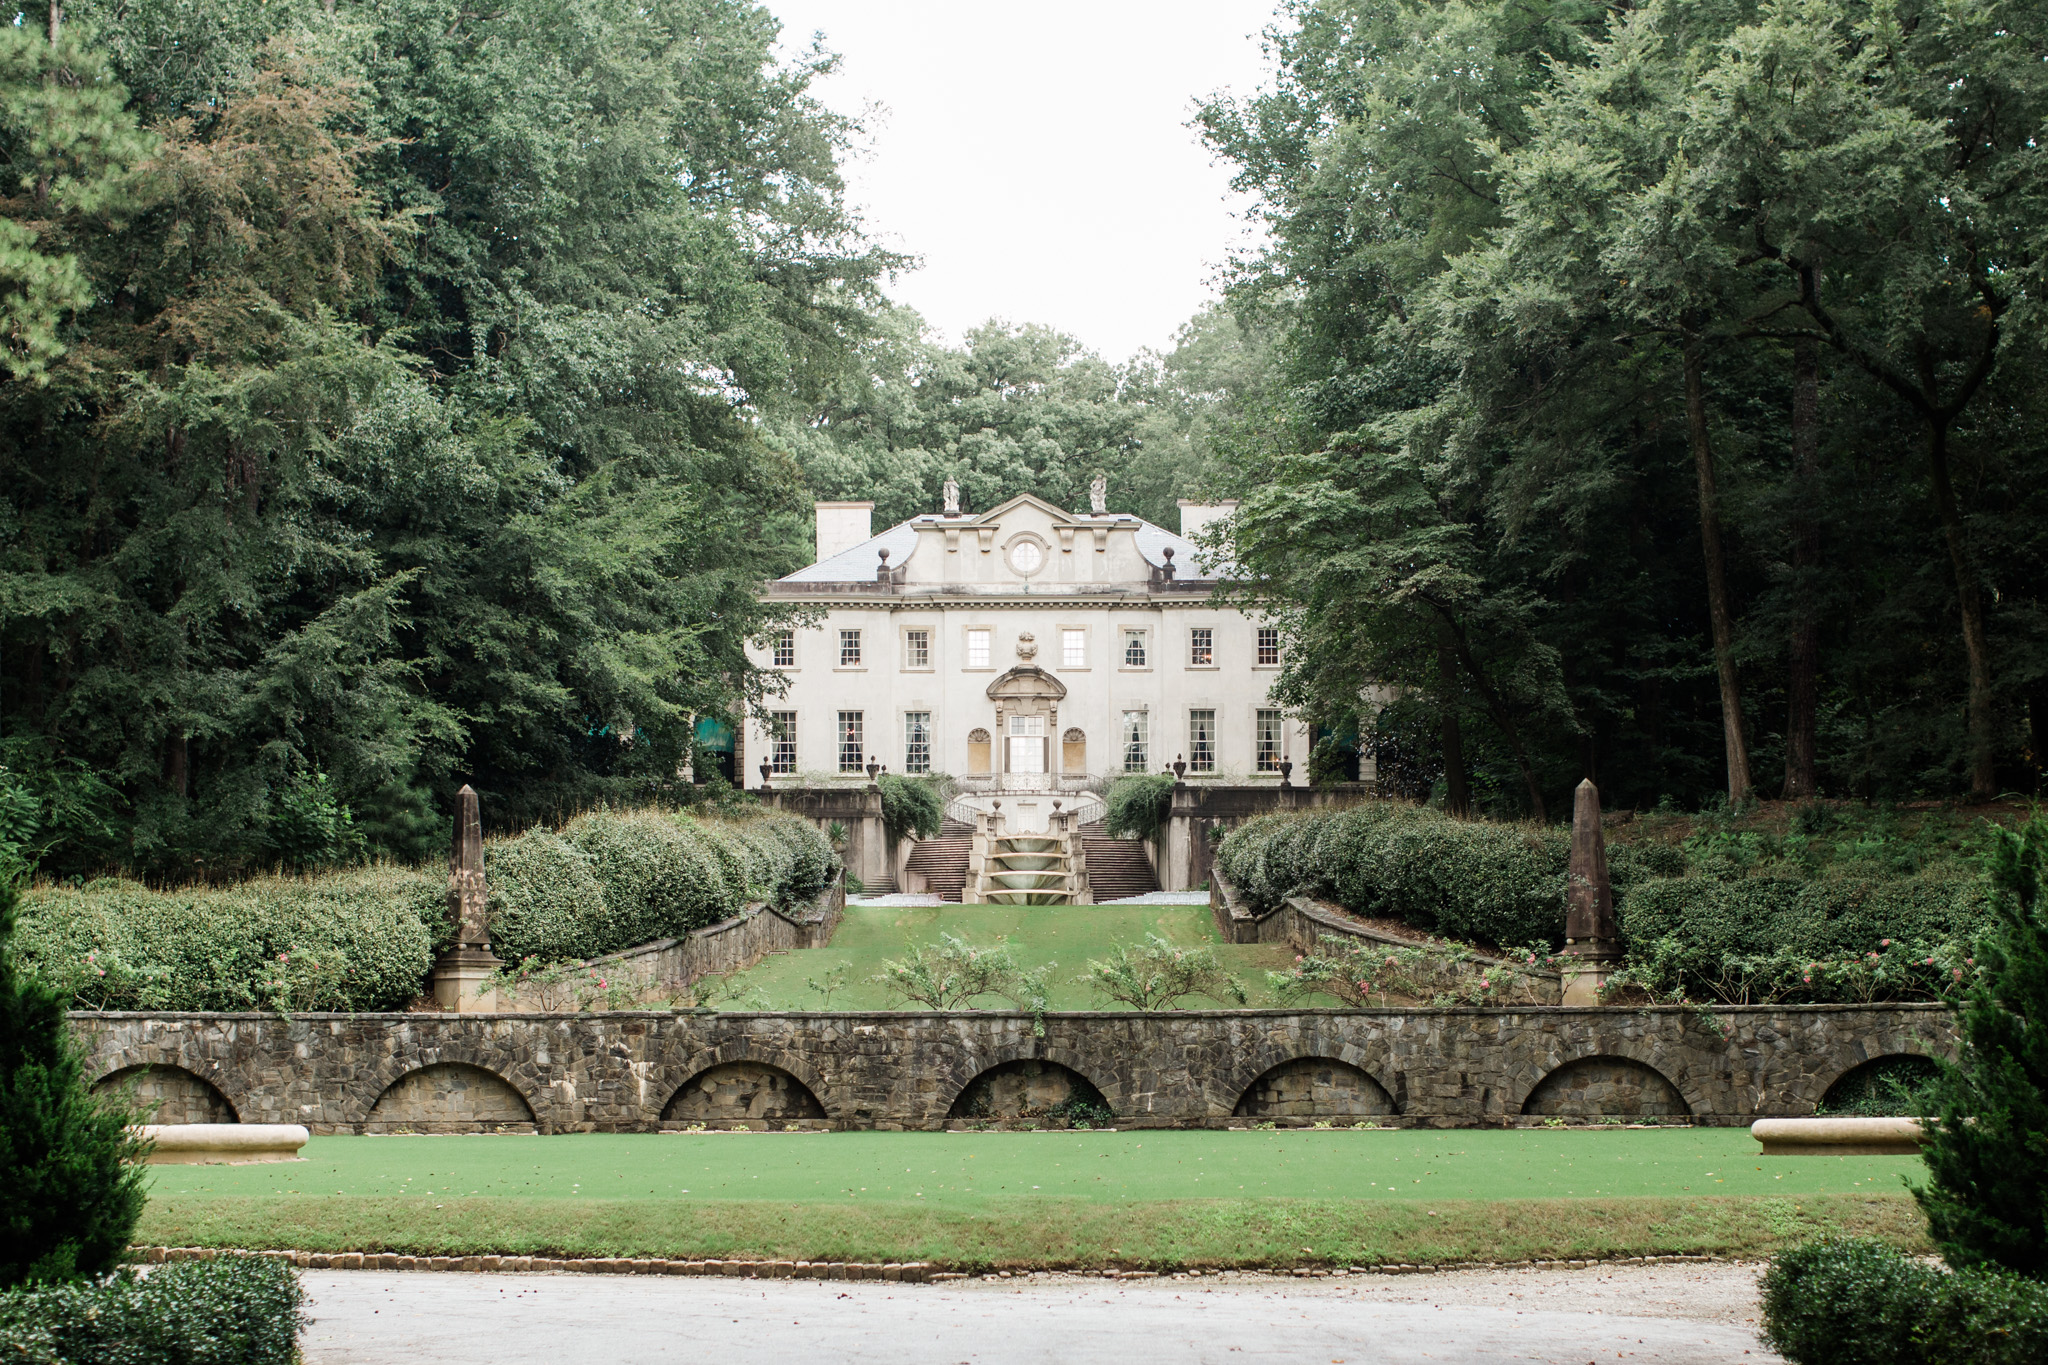 The Swan House is the perfect setting for the luxury bride. Wedding photography by Atlanta's luxury photographer Rebecca Cerasani